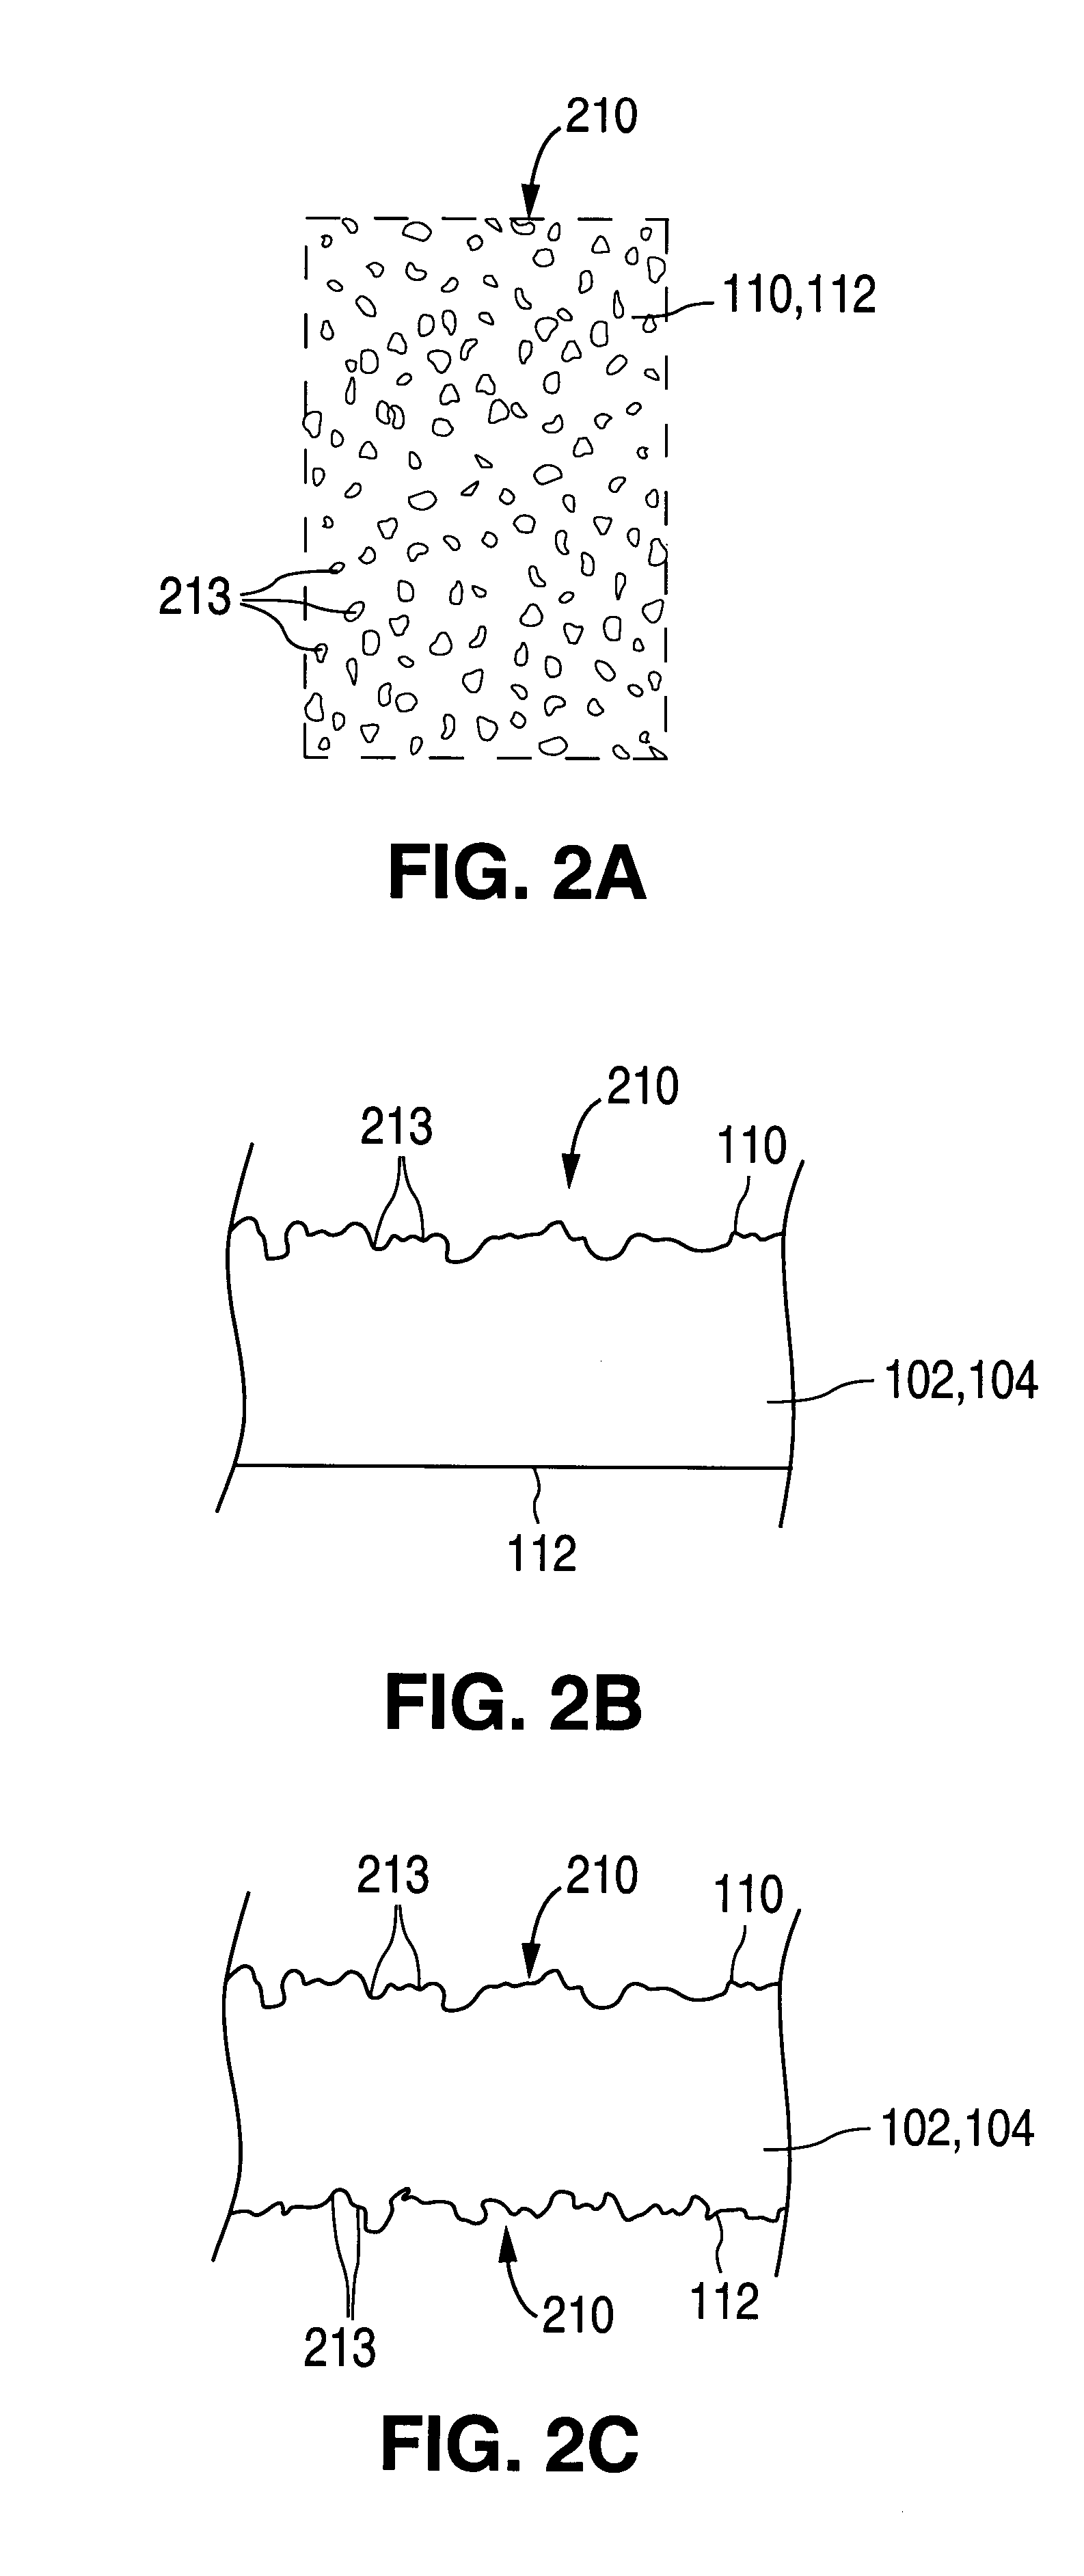 Method for creating a textured surface on an implantable medical device